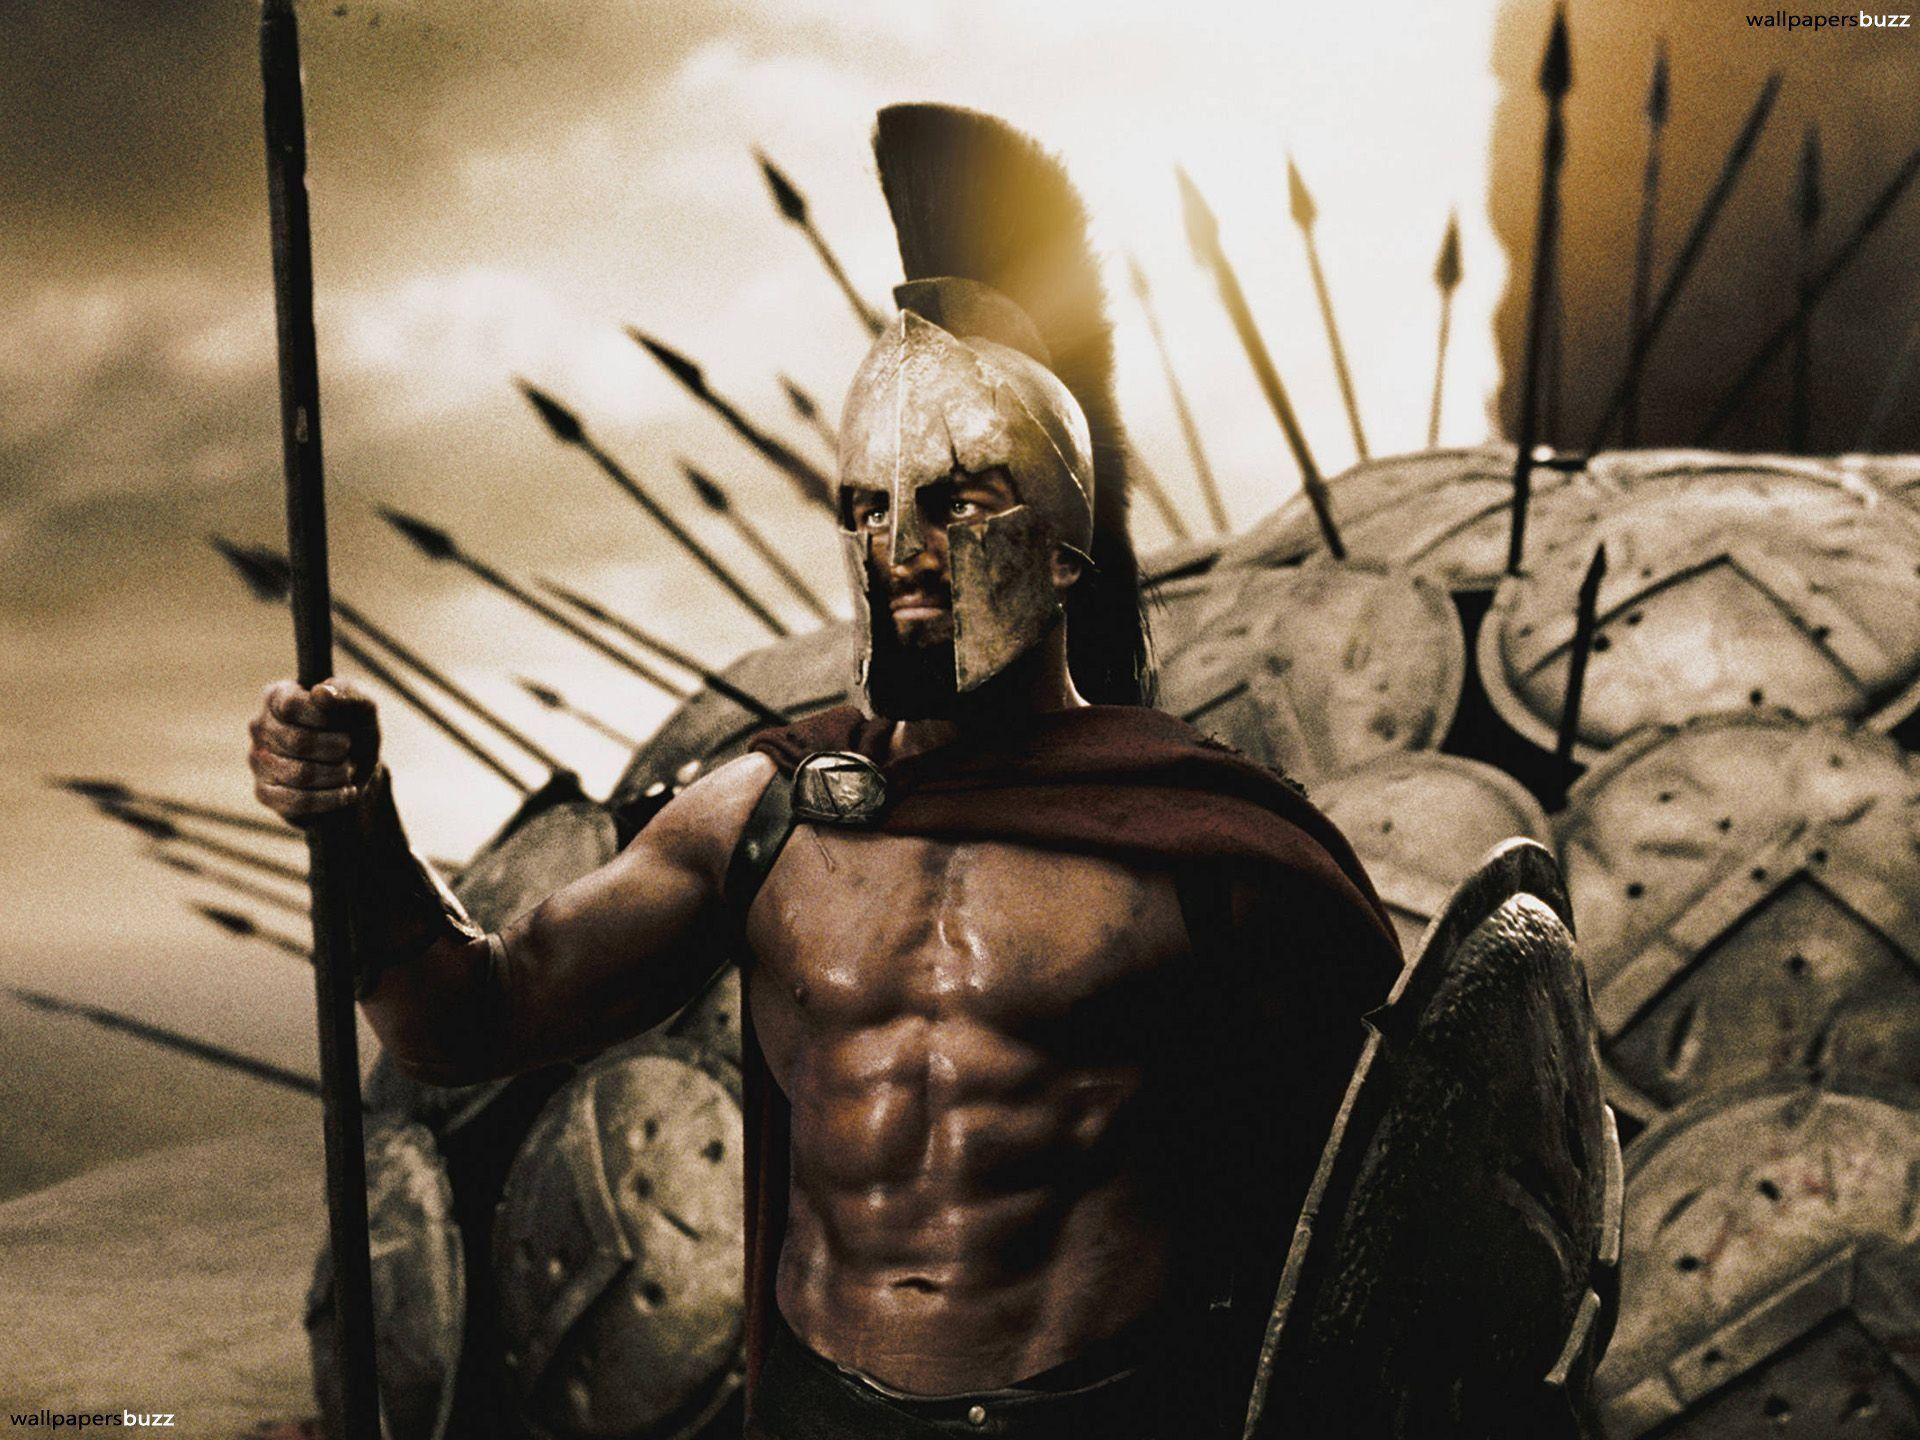 Ancient Spartan Warrior Wallpapers - Top Free Ancient Spartan Warrior ...